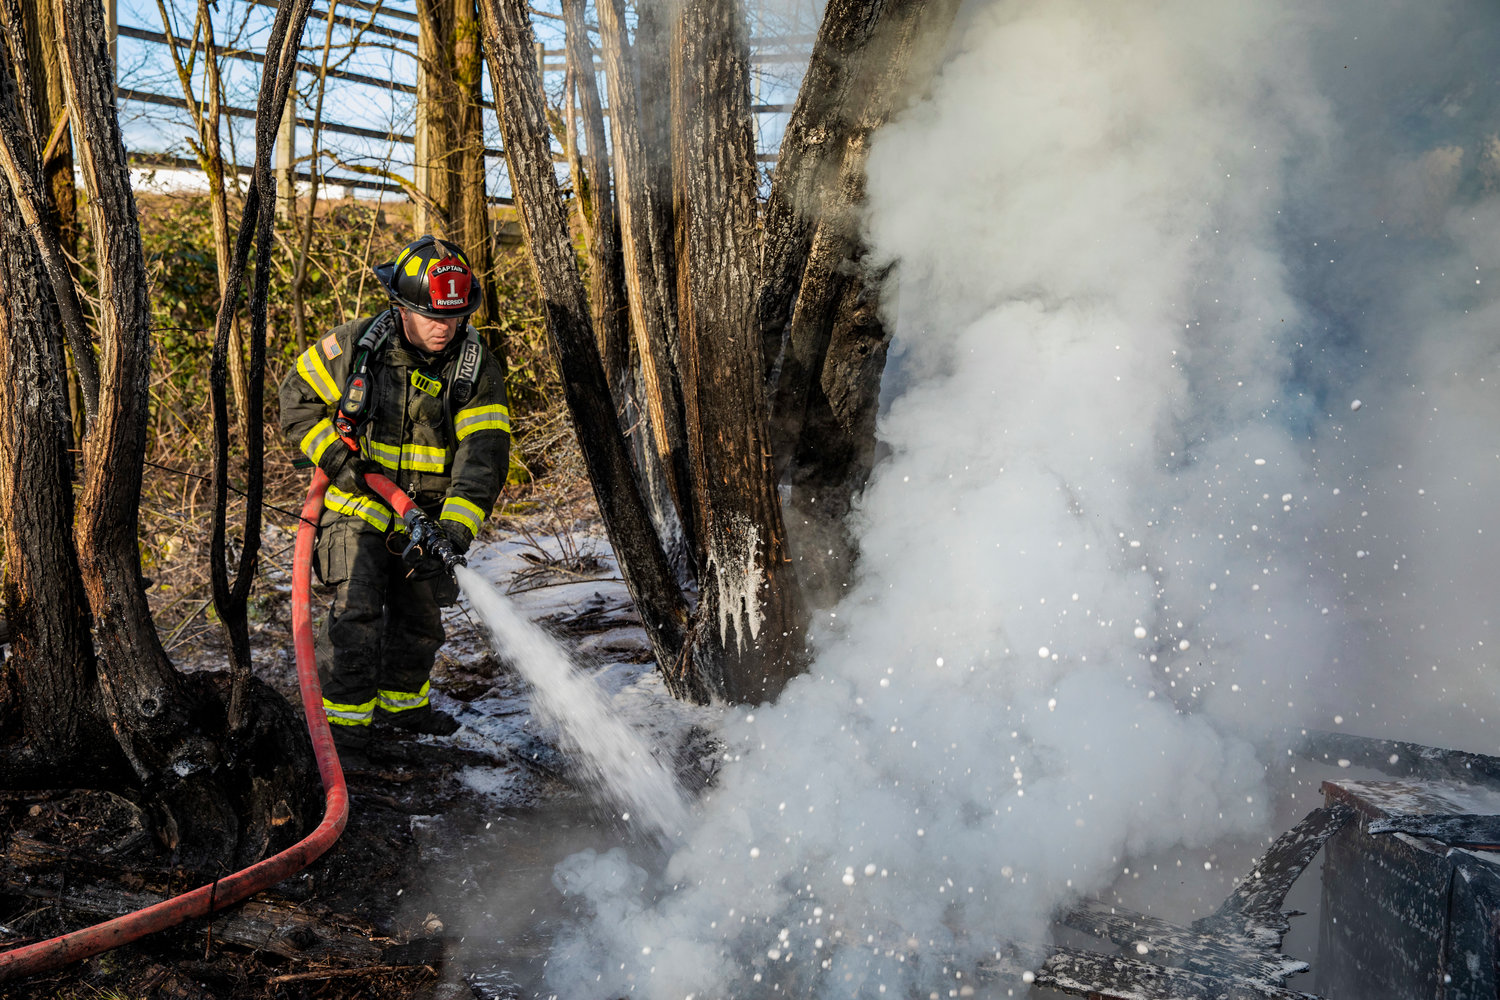 Captain Casey McCarthy, with Riverside Fire Authority, uses a hose to extinguish flames at an outbuilding that was supposed to be unoccupied along Long Road in Centralia Thursday morning. That Chronicle had not learned the cause of the fire as of Friday afternoon. There were no injuries reported.